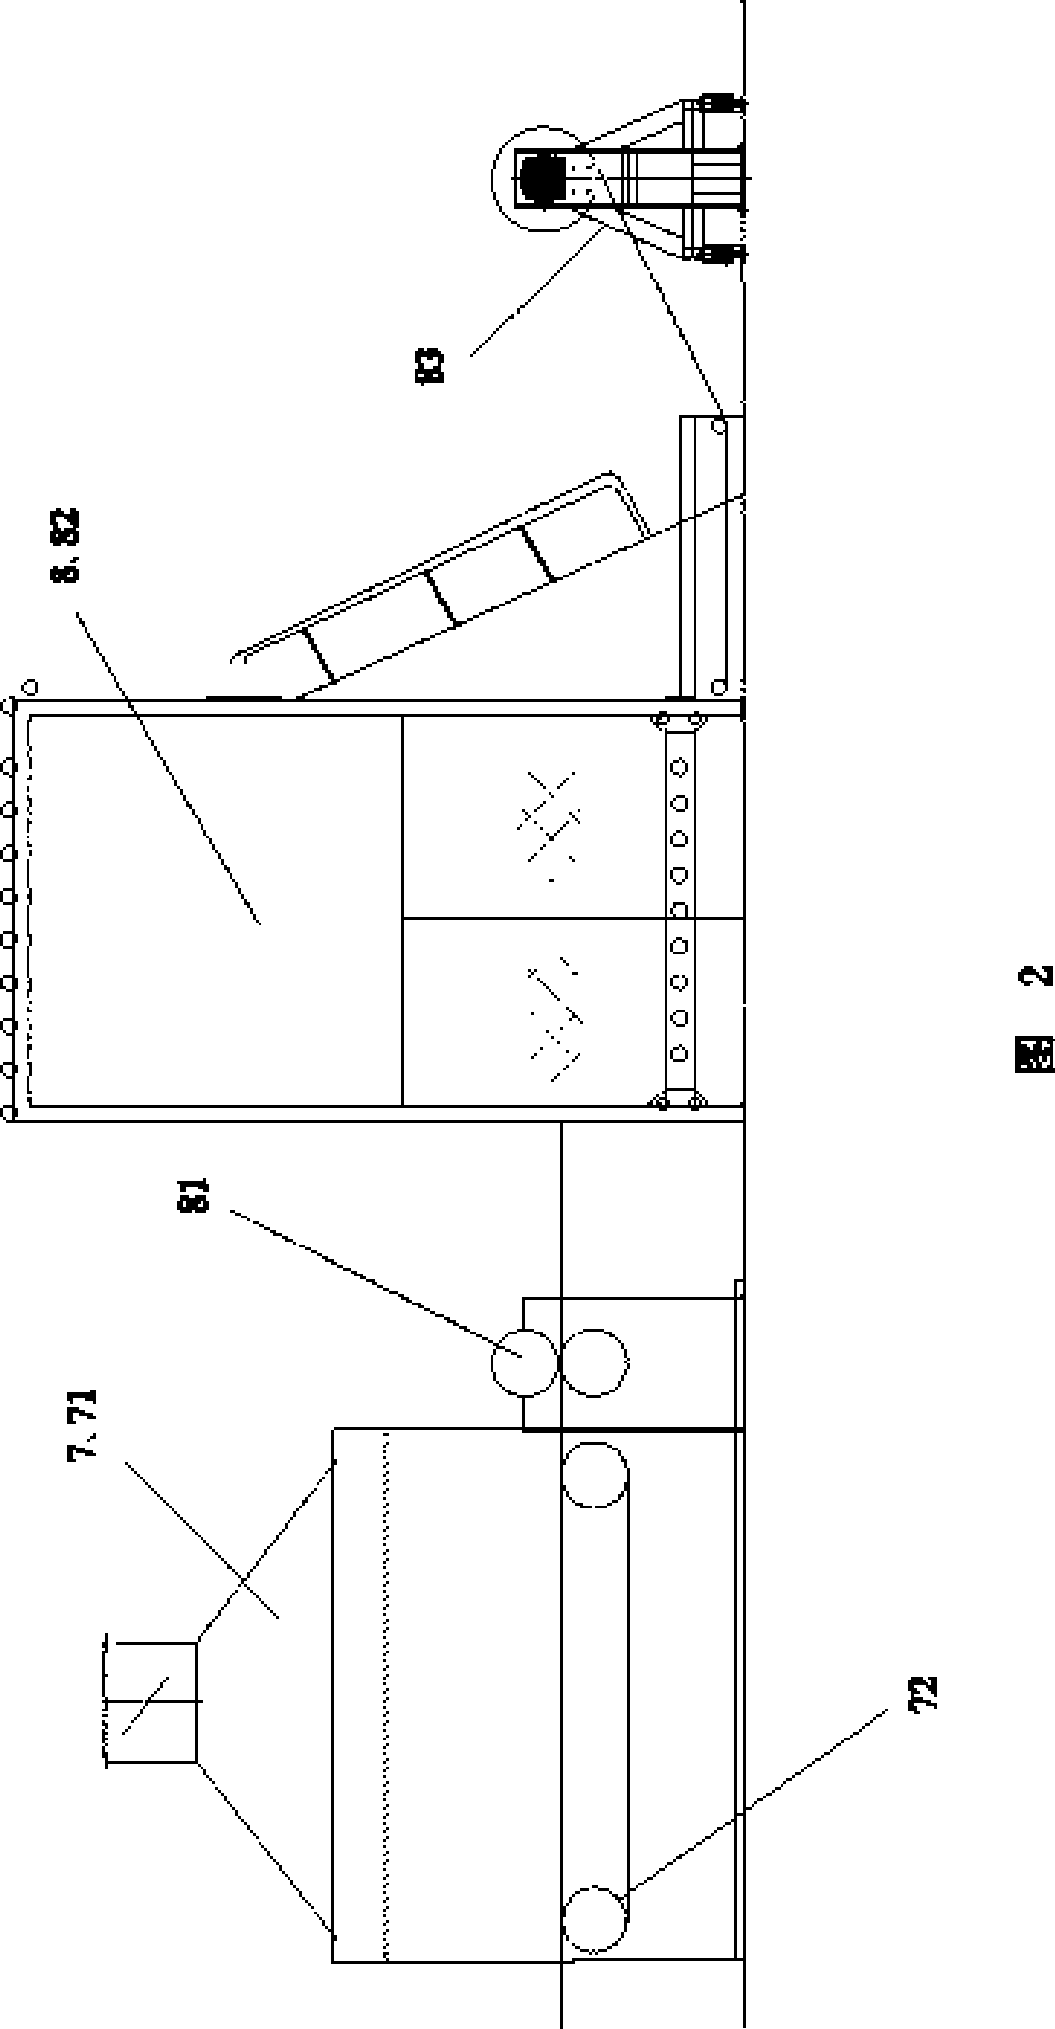 System and method for manufacturing flocking wall hangings